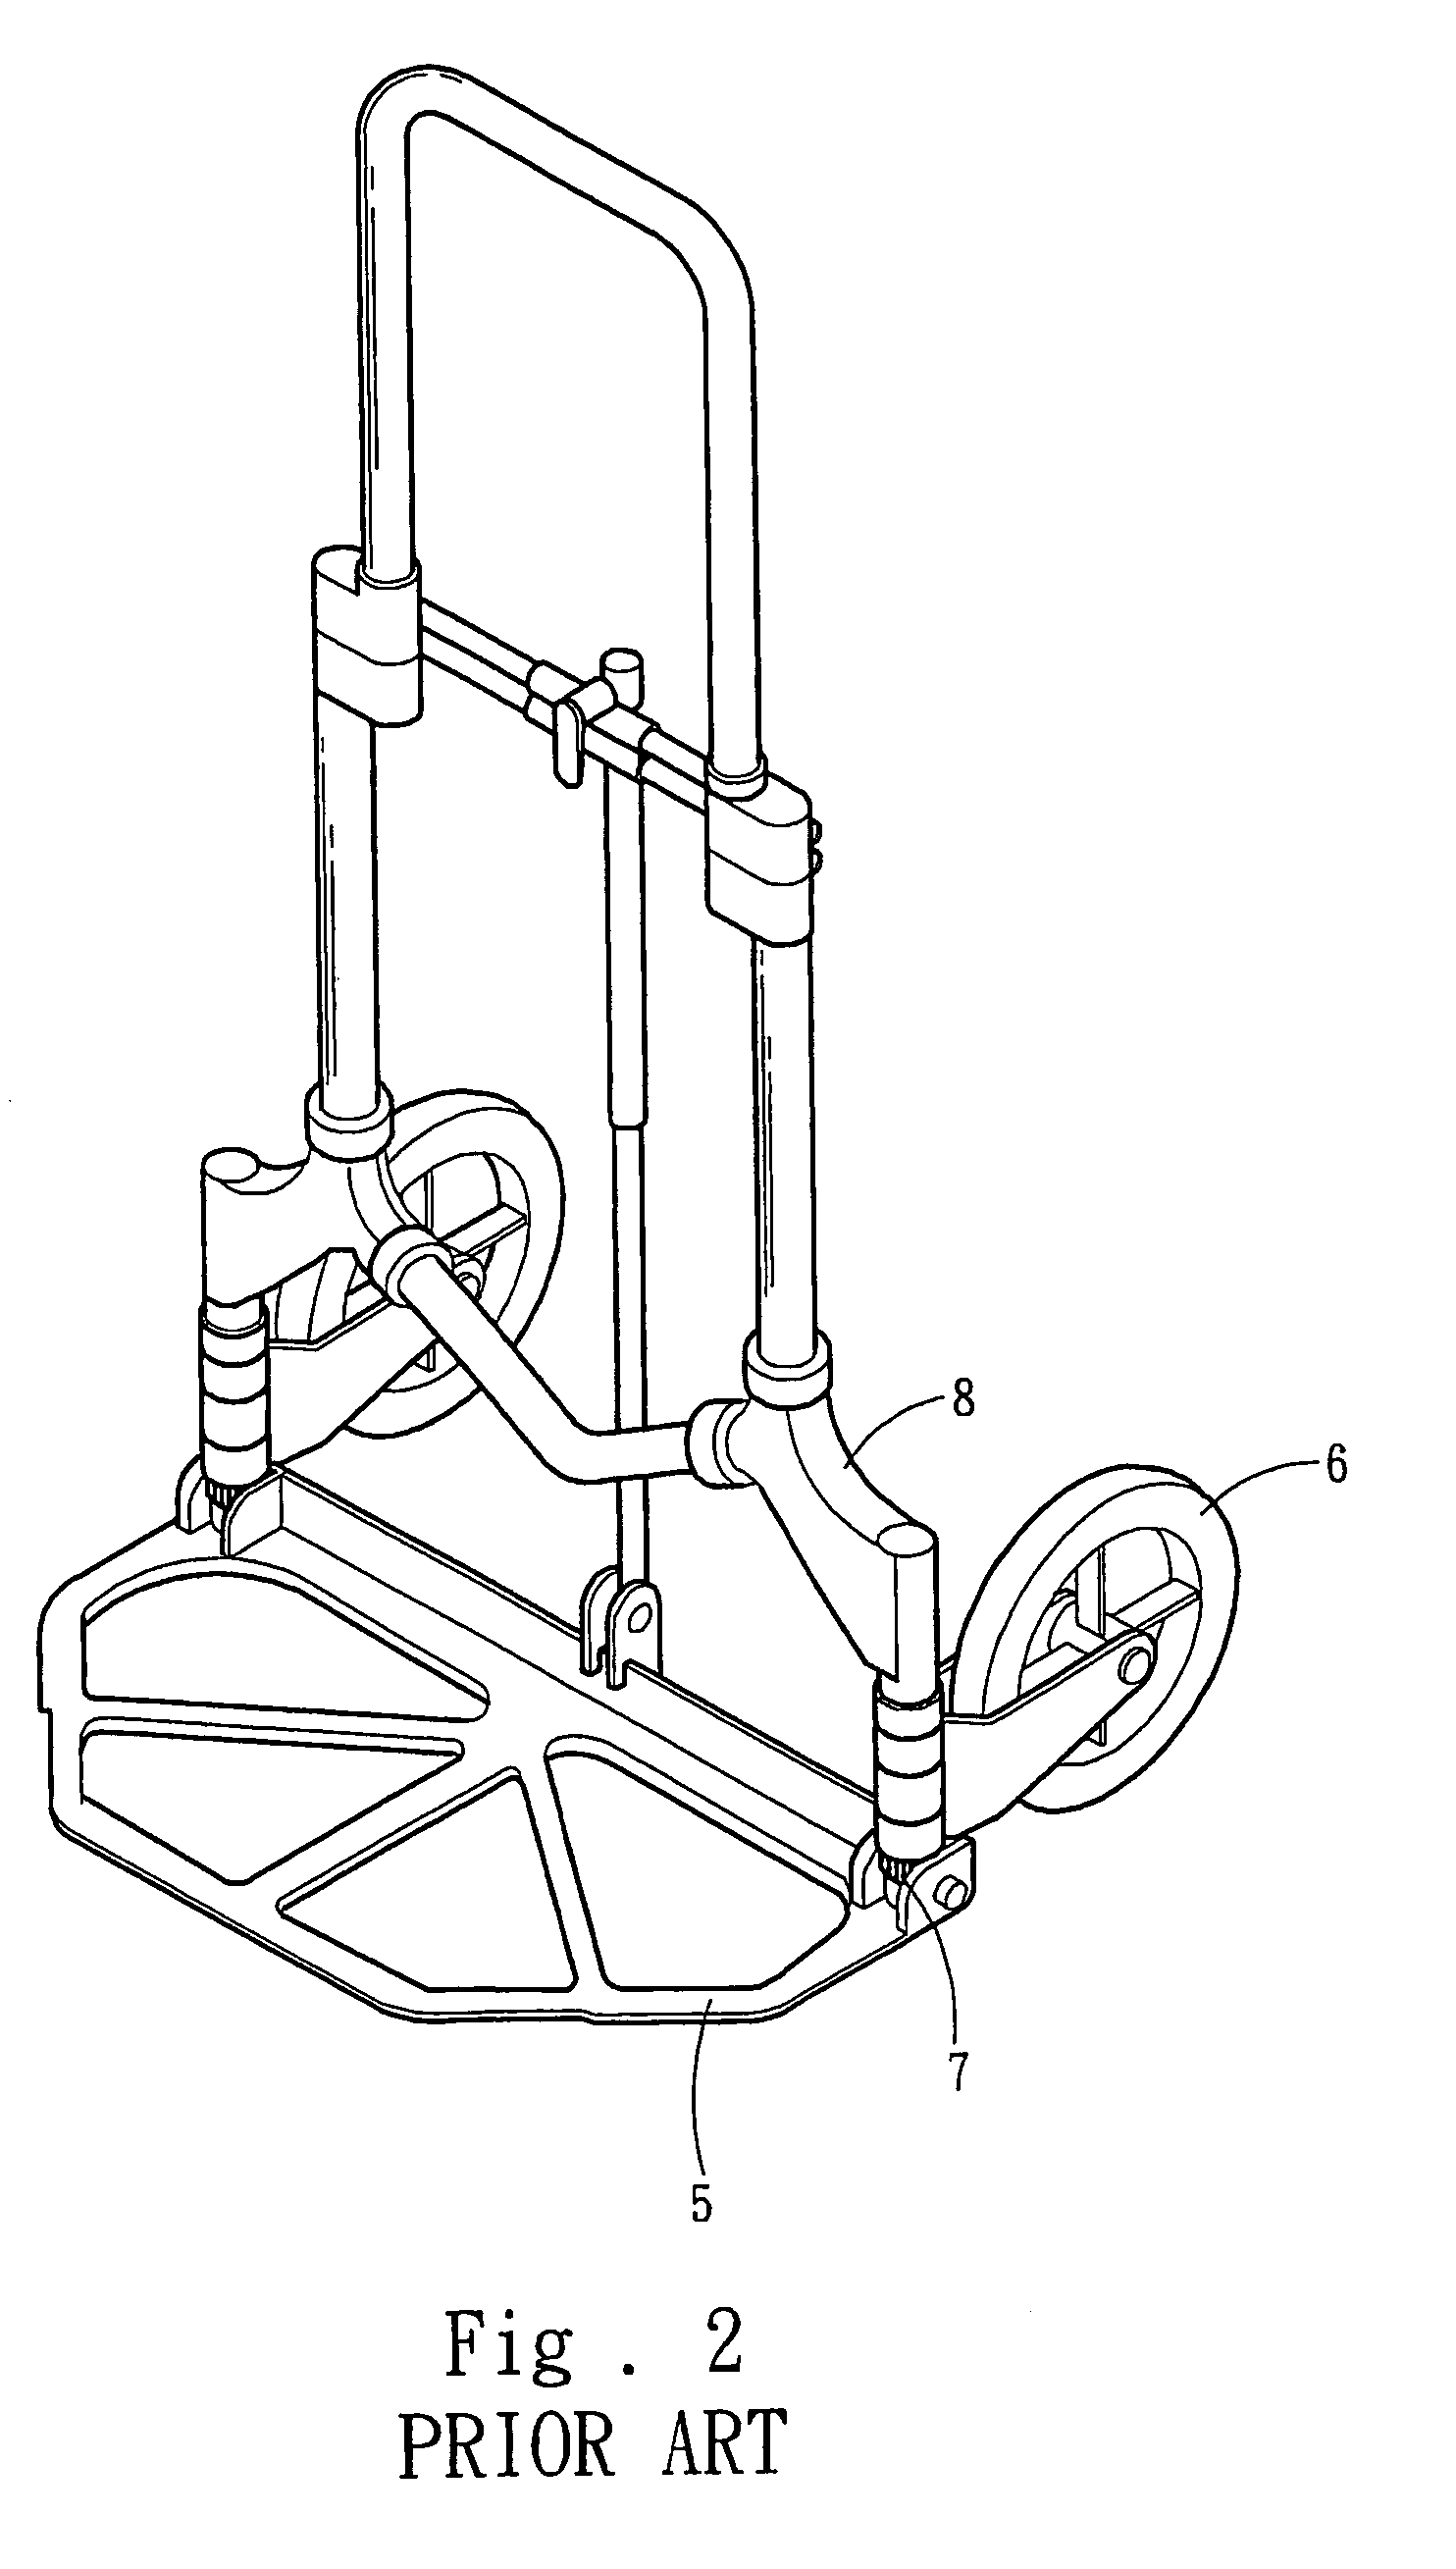 Folding anchor structure for foldable hand trucks